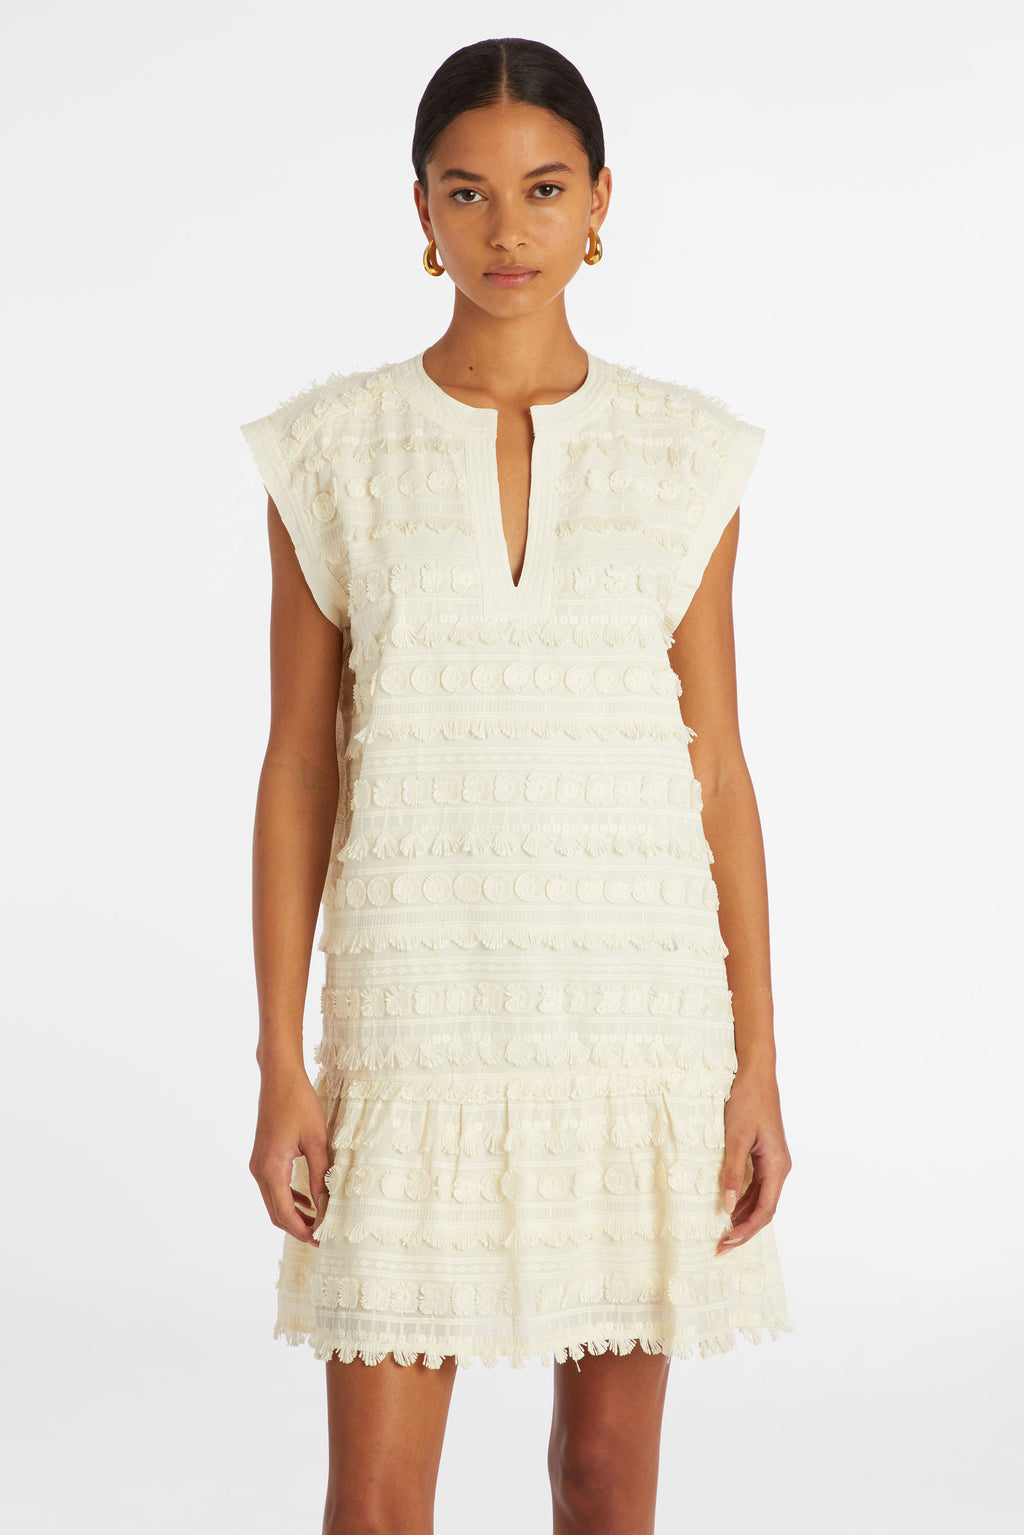 Short white dress in a solid white with short sleeves and a v-neckline